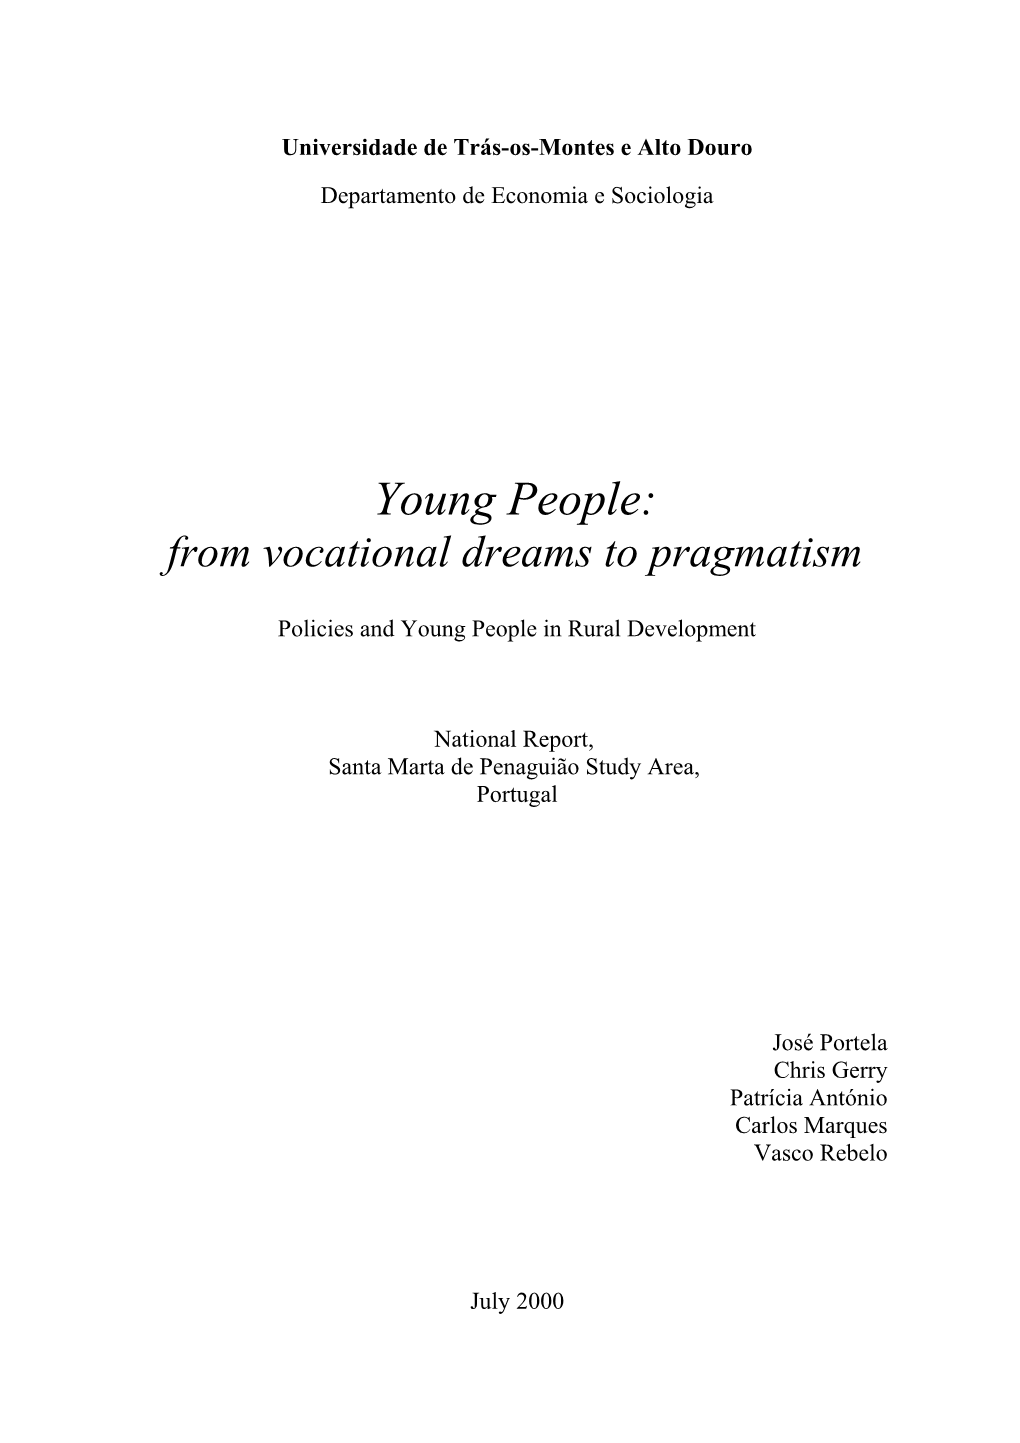 From Vocational Dreams to Pragmatism